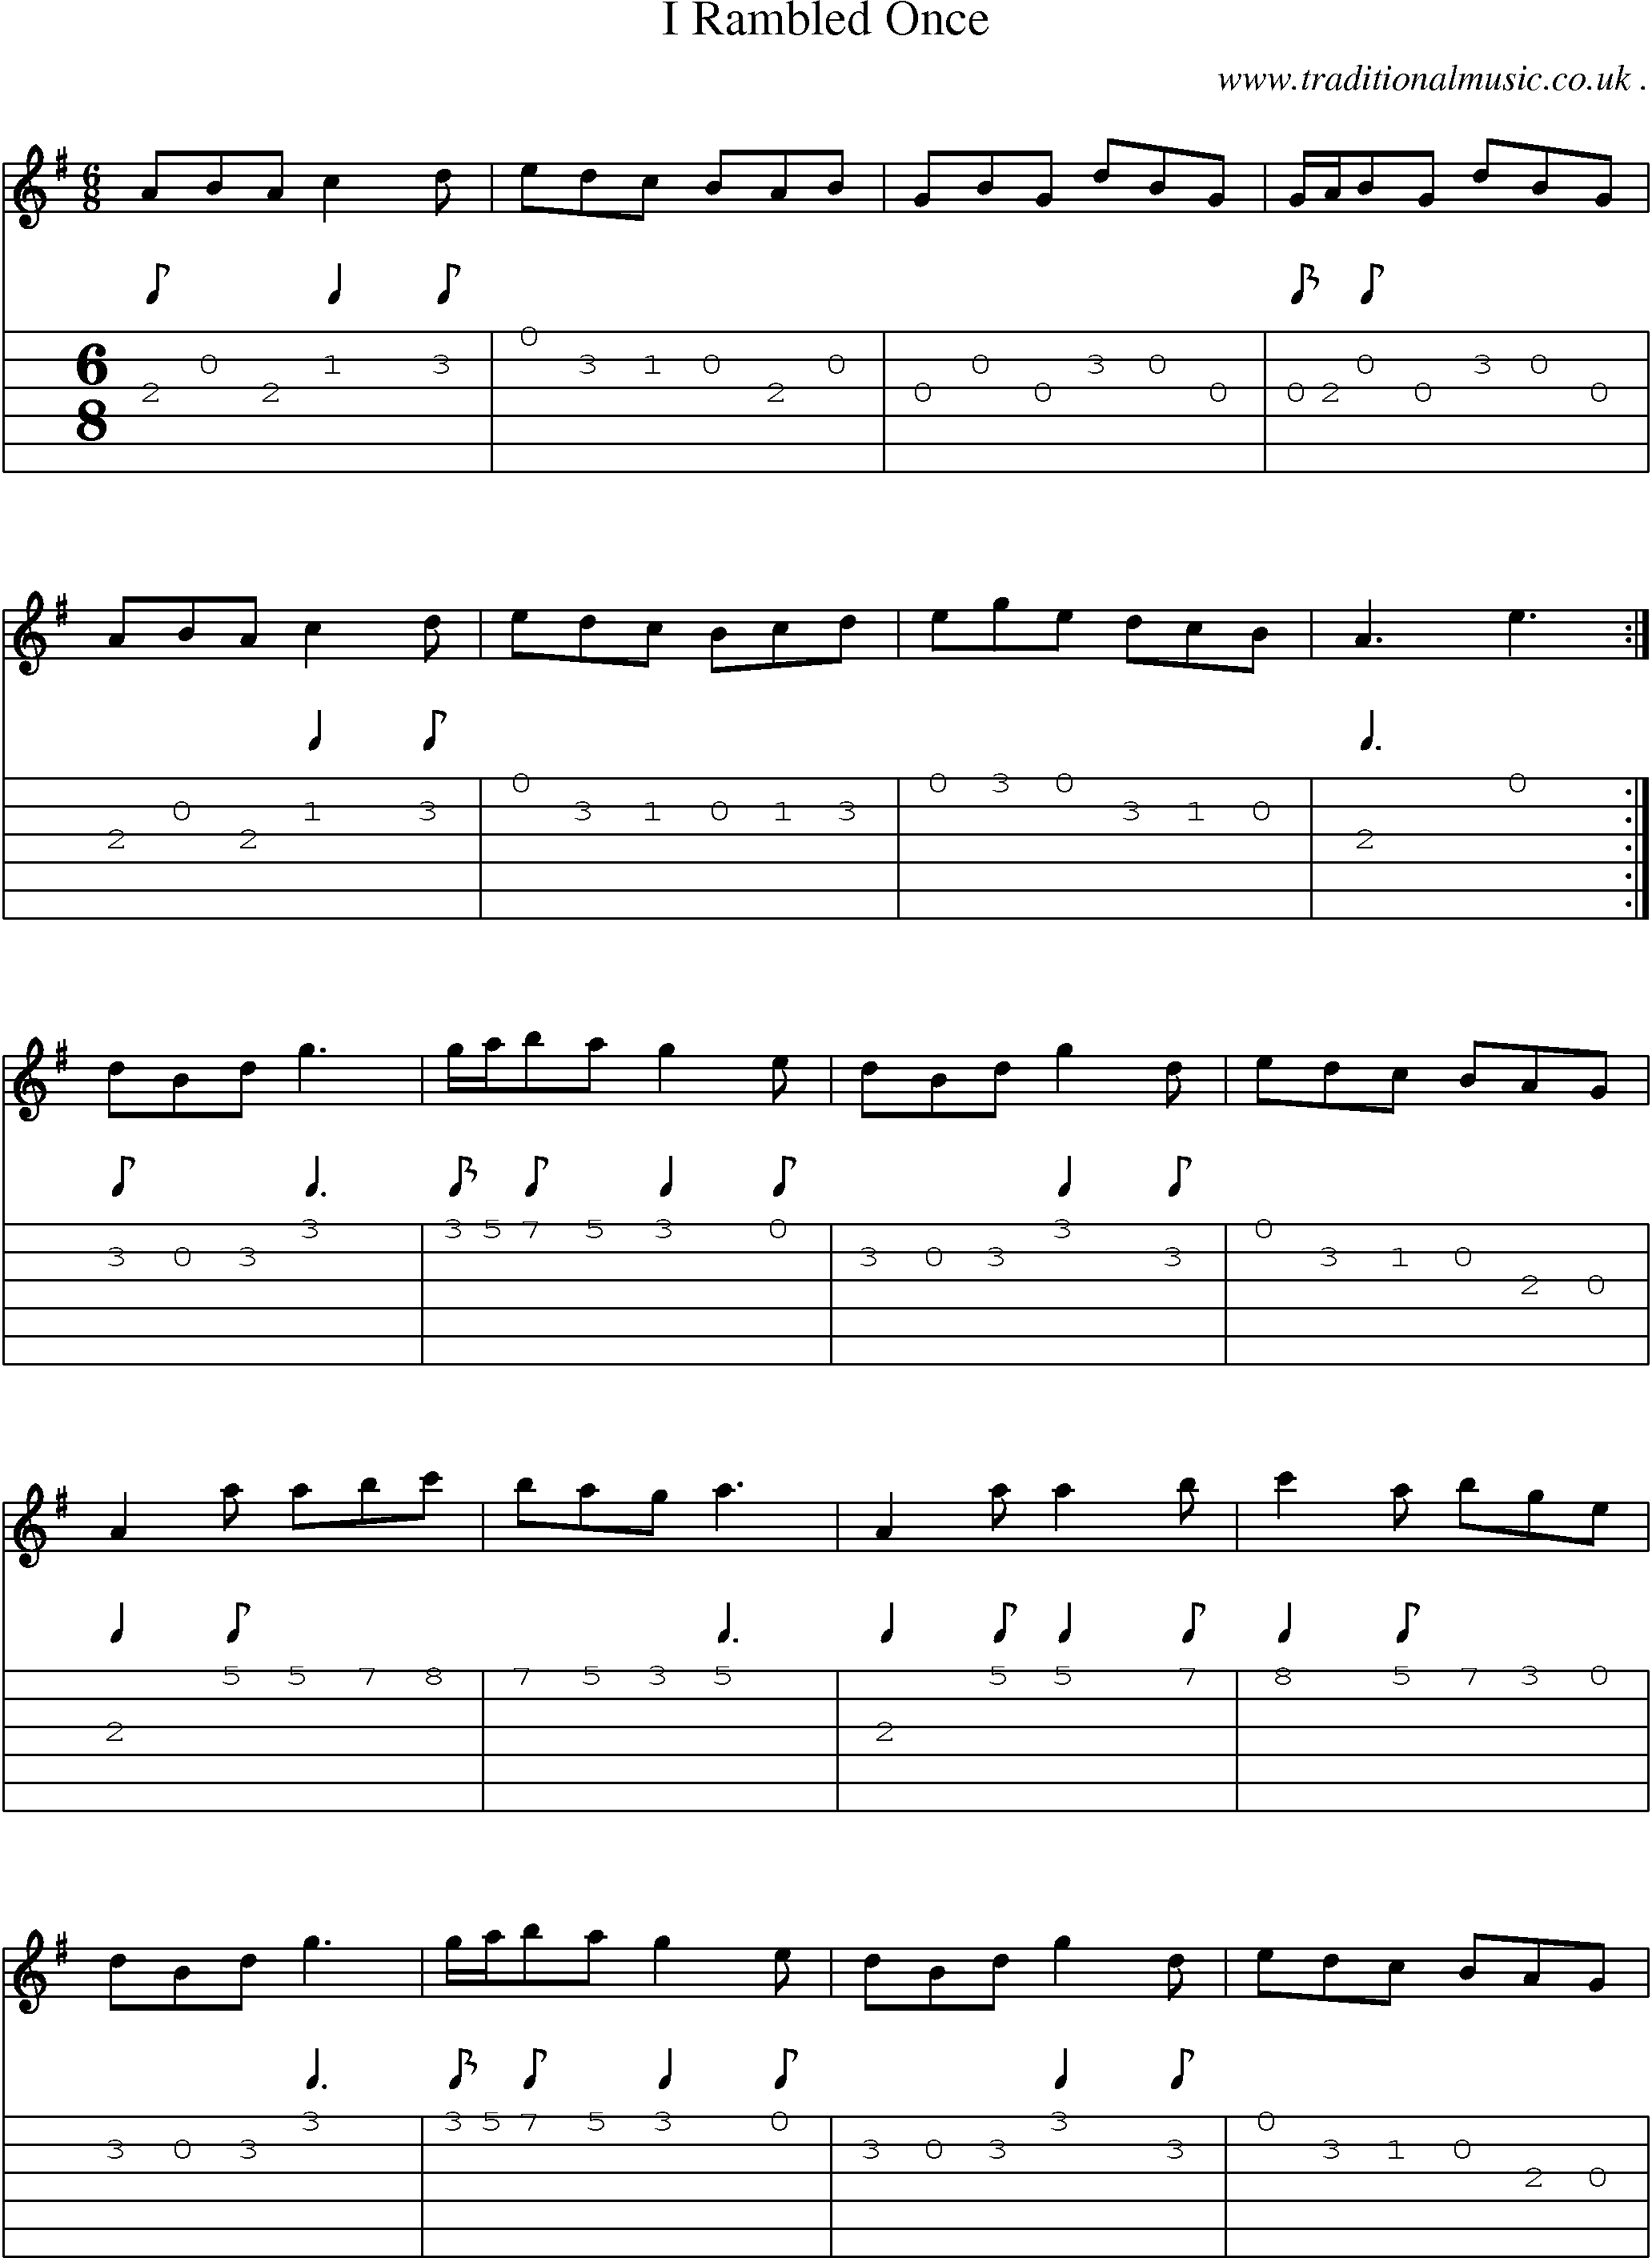 Sheet-Music and Guitar Tabs for I Rambled Once